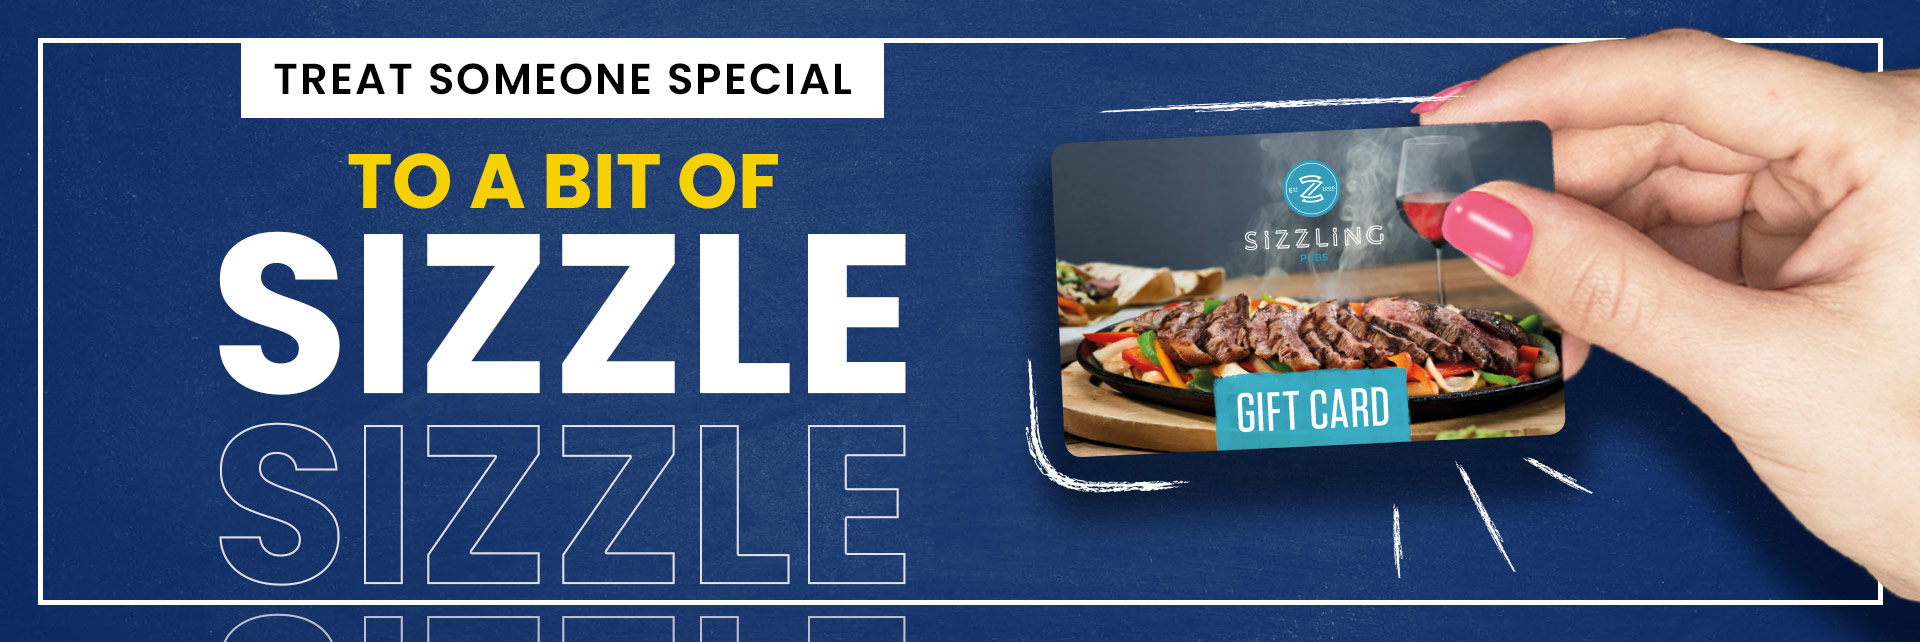 Sizzling Pubs Gift Card at The White Hart in Heywood